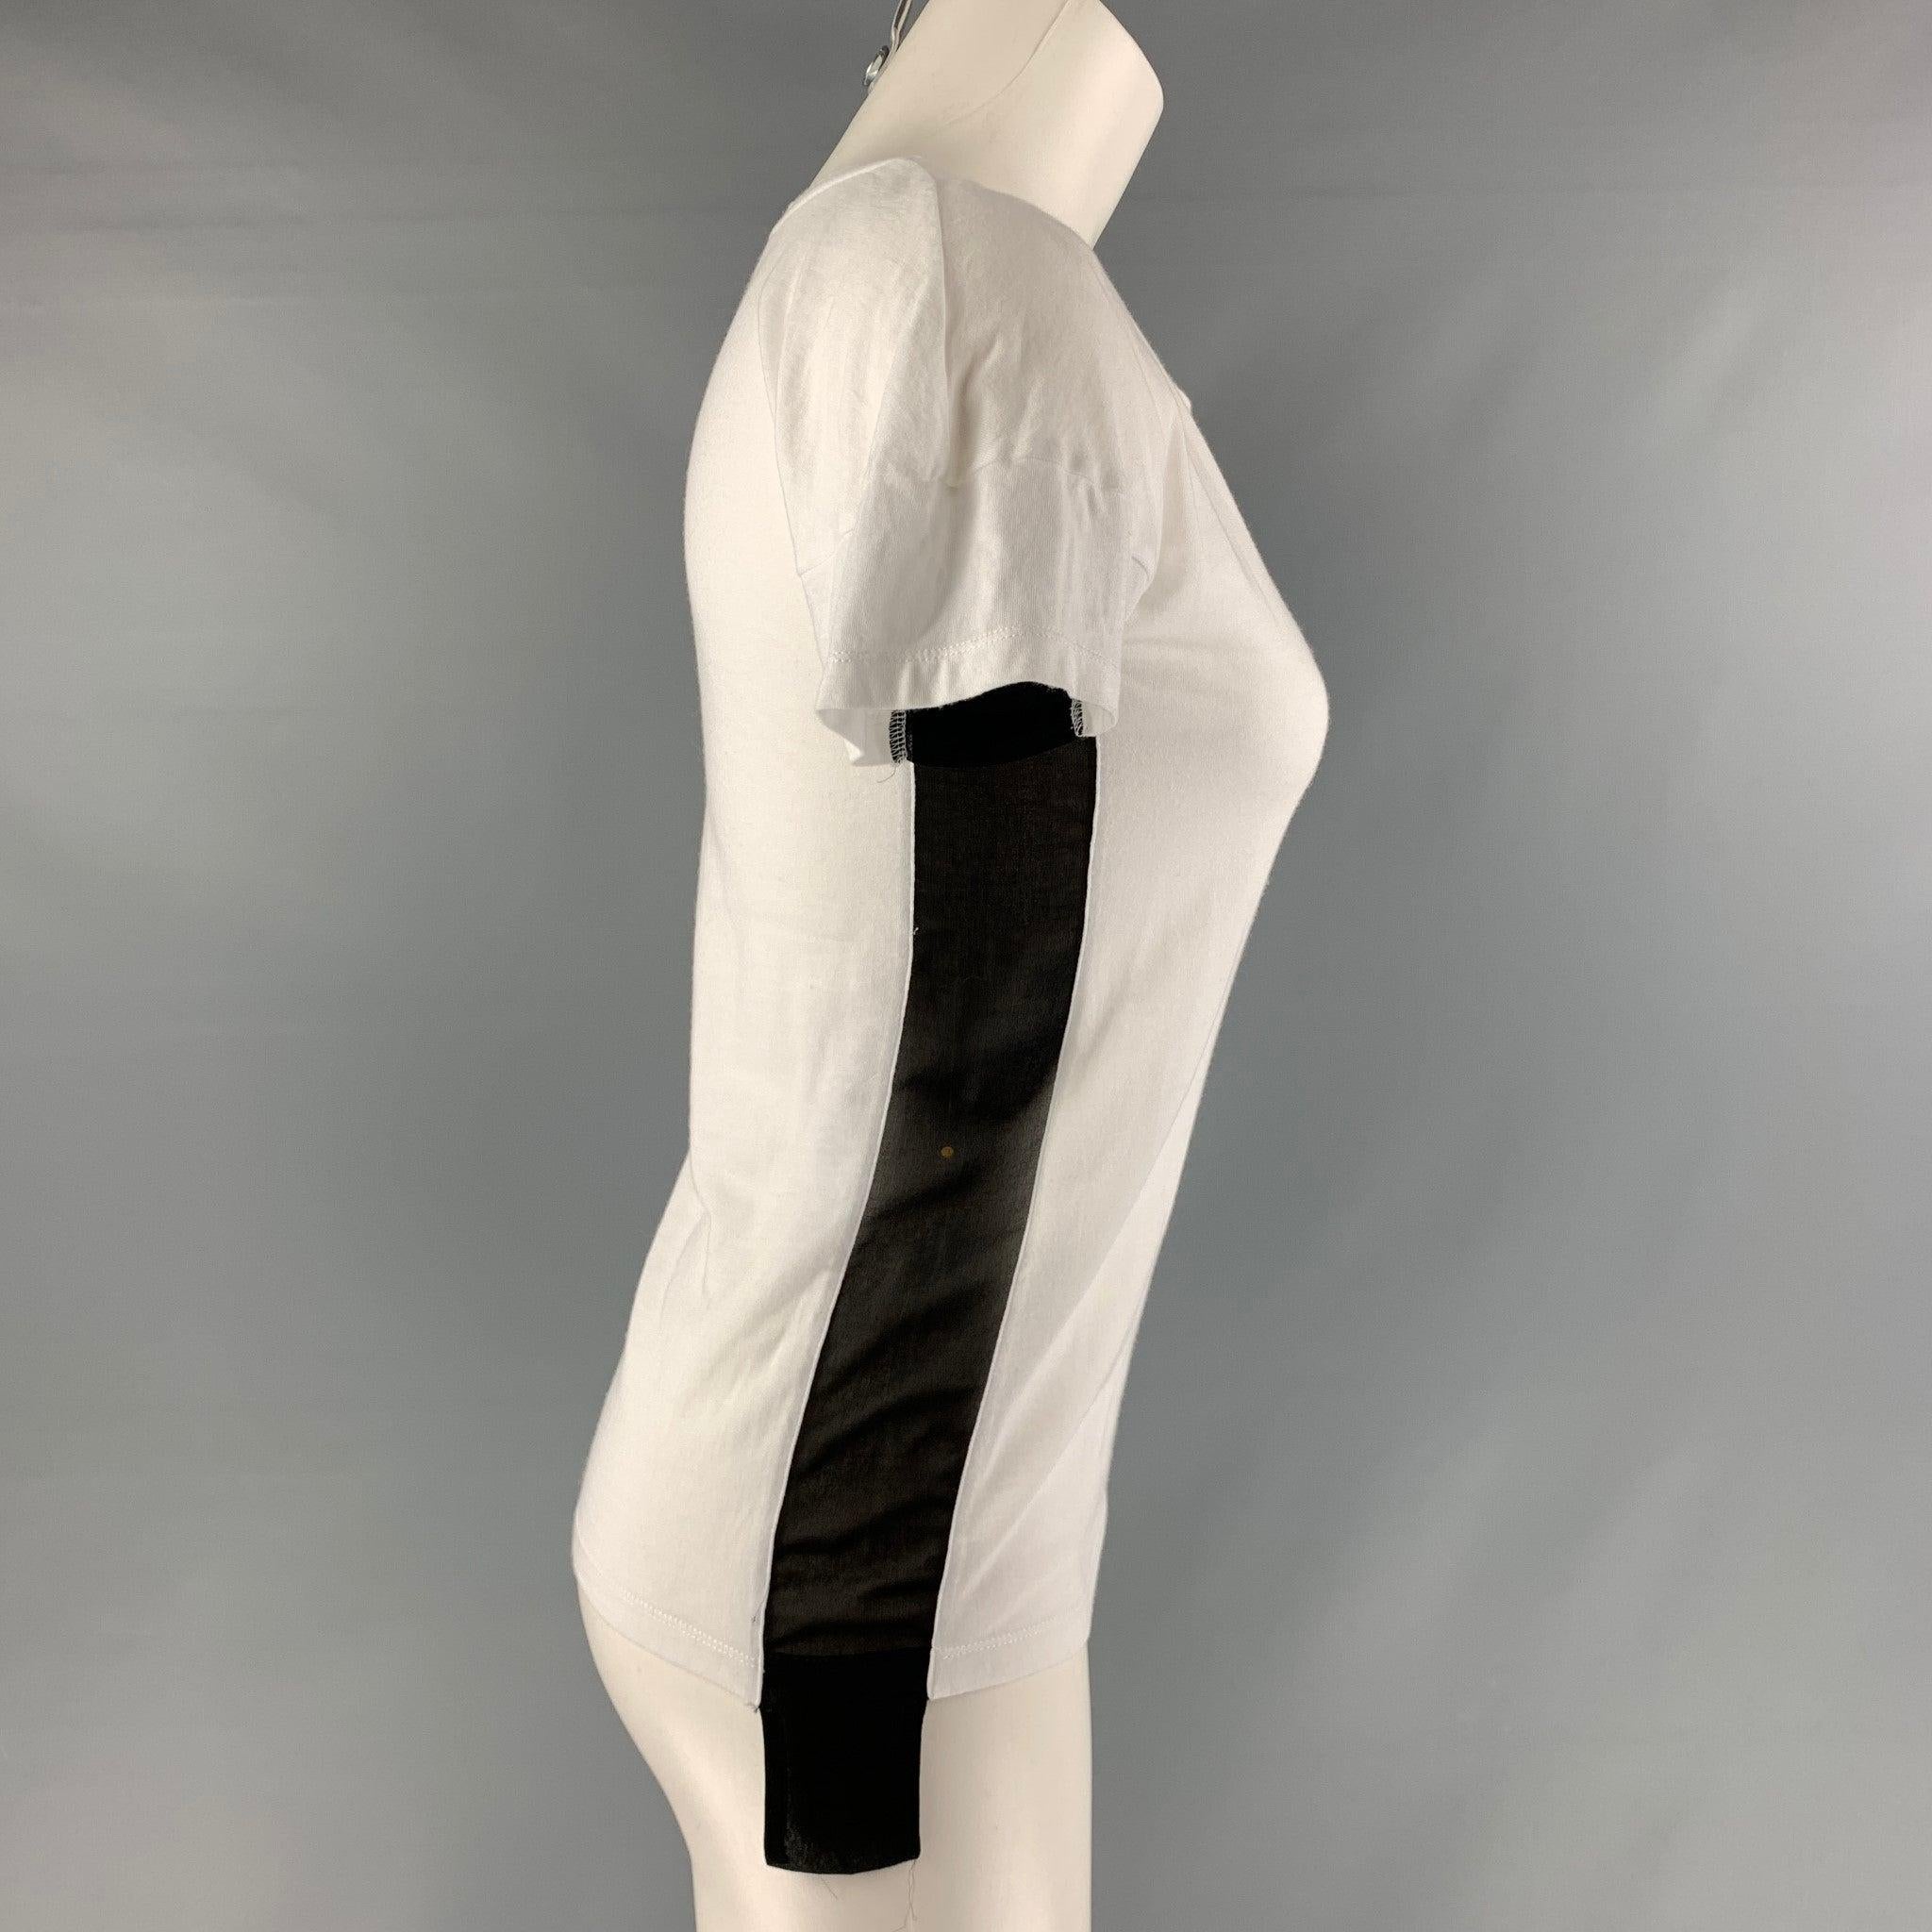 SONIA RYKIEL T-shirt comes in a white cotton featuring a crew neck and black panels on sides. Excellent
 Pre-Owned Condition. Fabric tag removed. 

Marked:   No size marked.  

Measurements: 
 
Shoulder: 17 inches Bust: 30 inches Sleeve: 3 inches